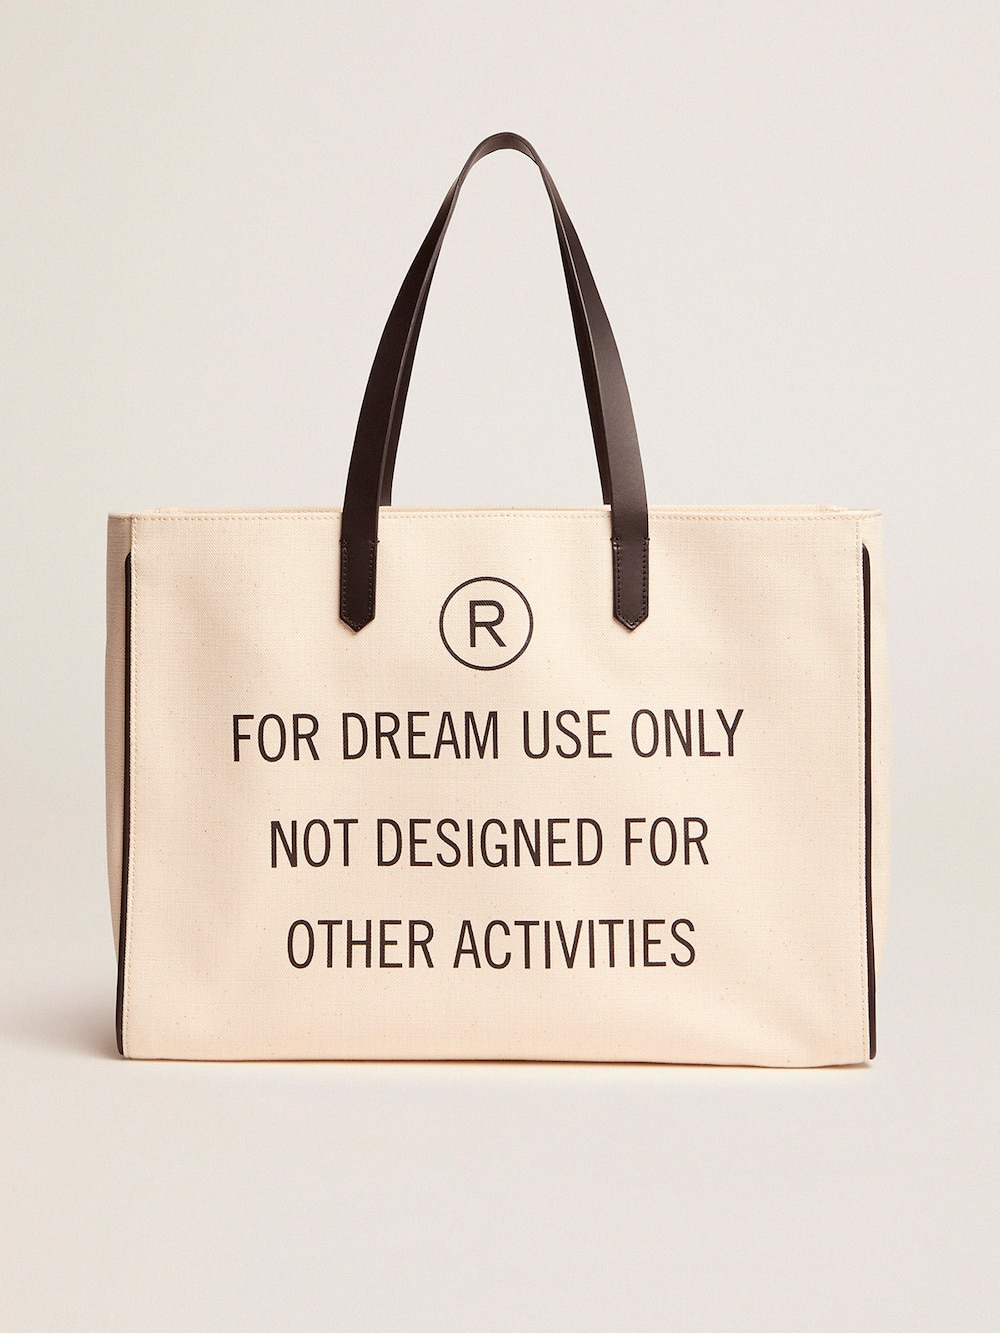 Golden Goose - "For dream use only" East-West California Bag in 